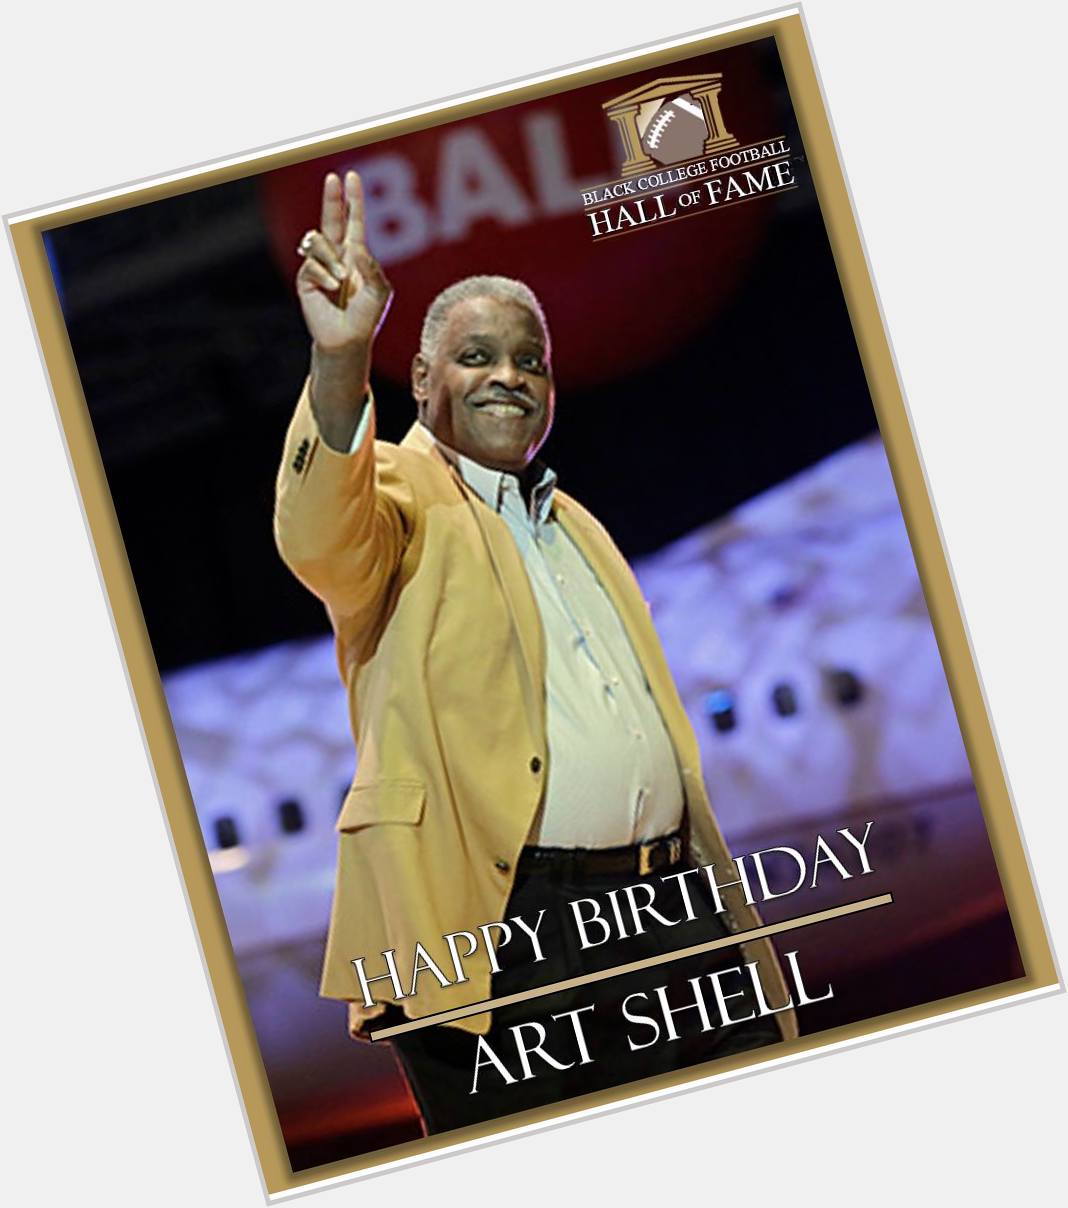 Happy birthday to Black College Football Hall of Fame Class of 2011 Inductee, Art Shell!
 